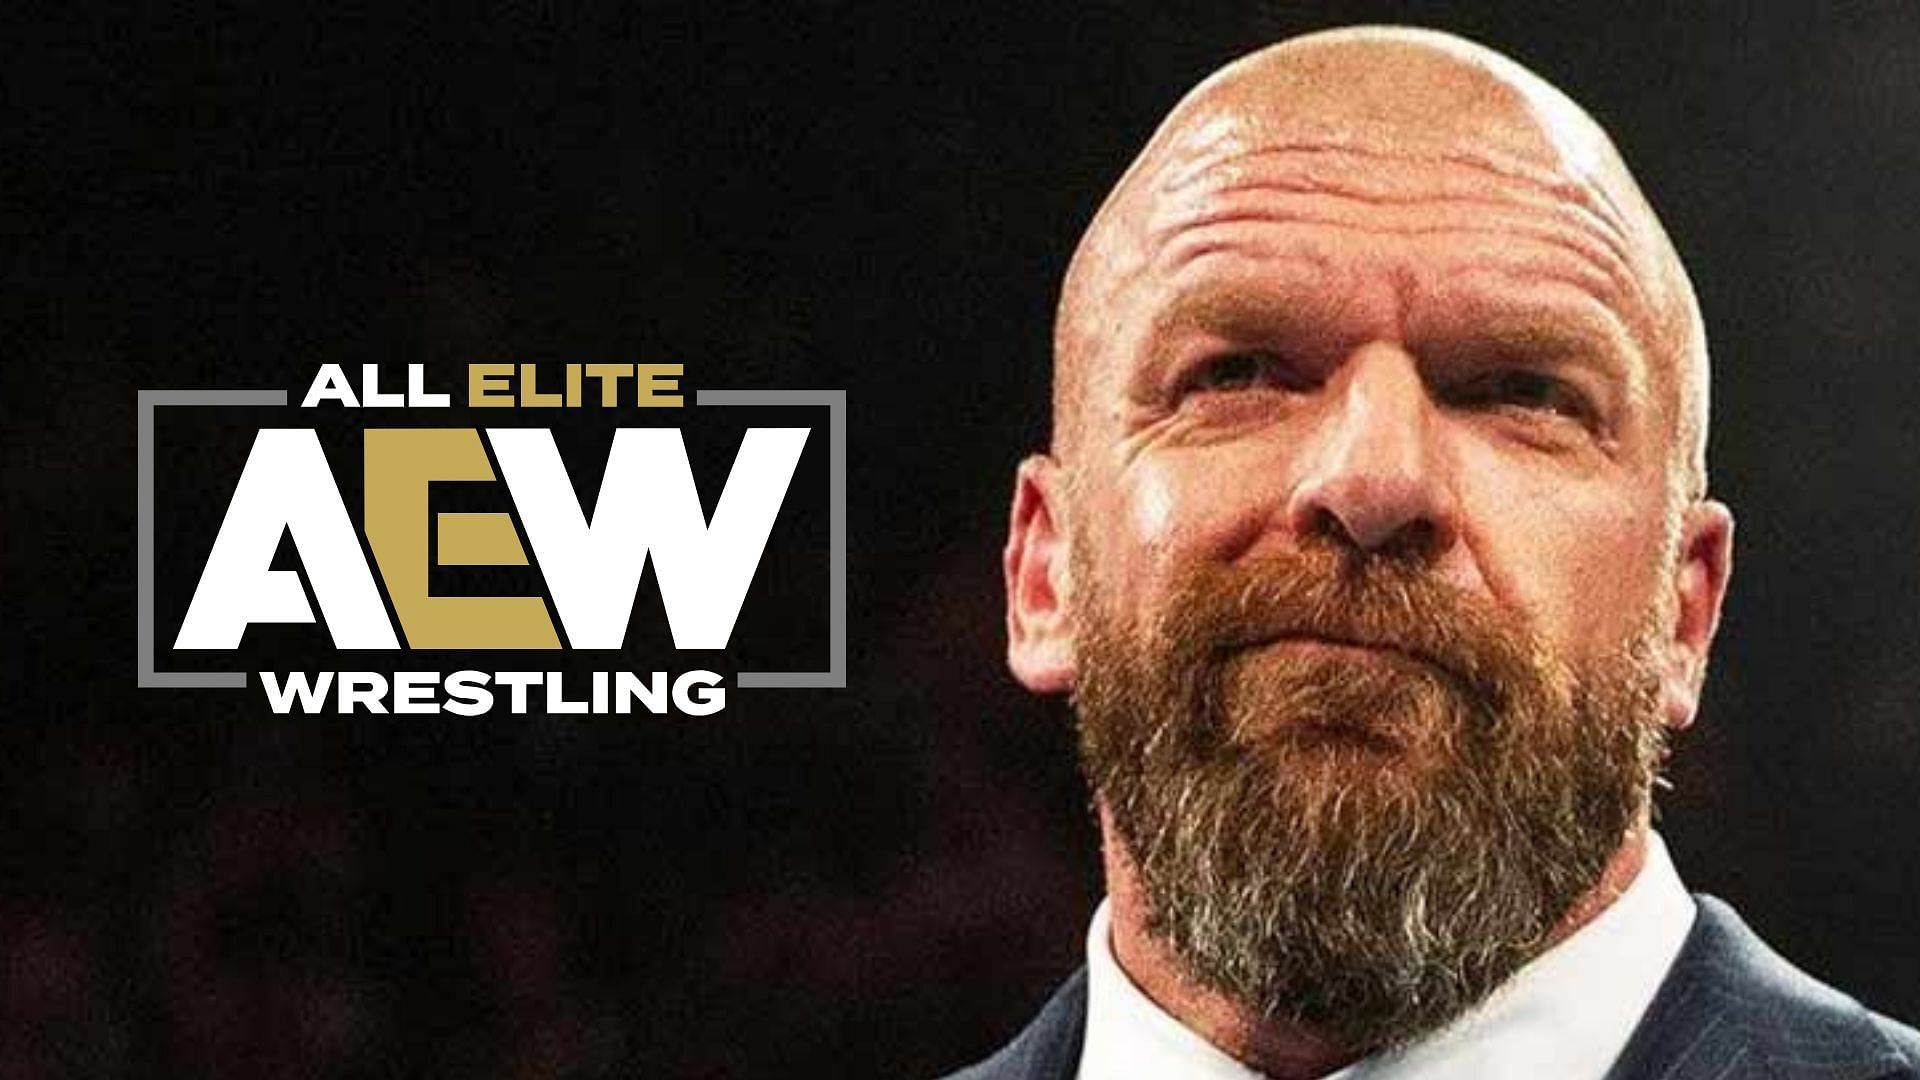 Could a recent AEW debutant be WWE bound in the near future?